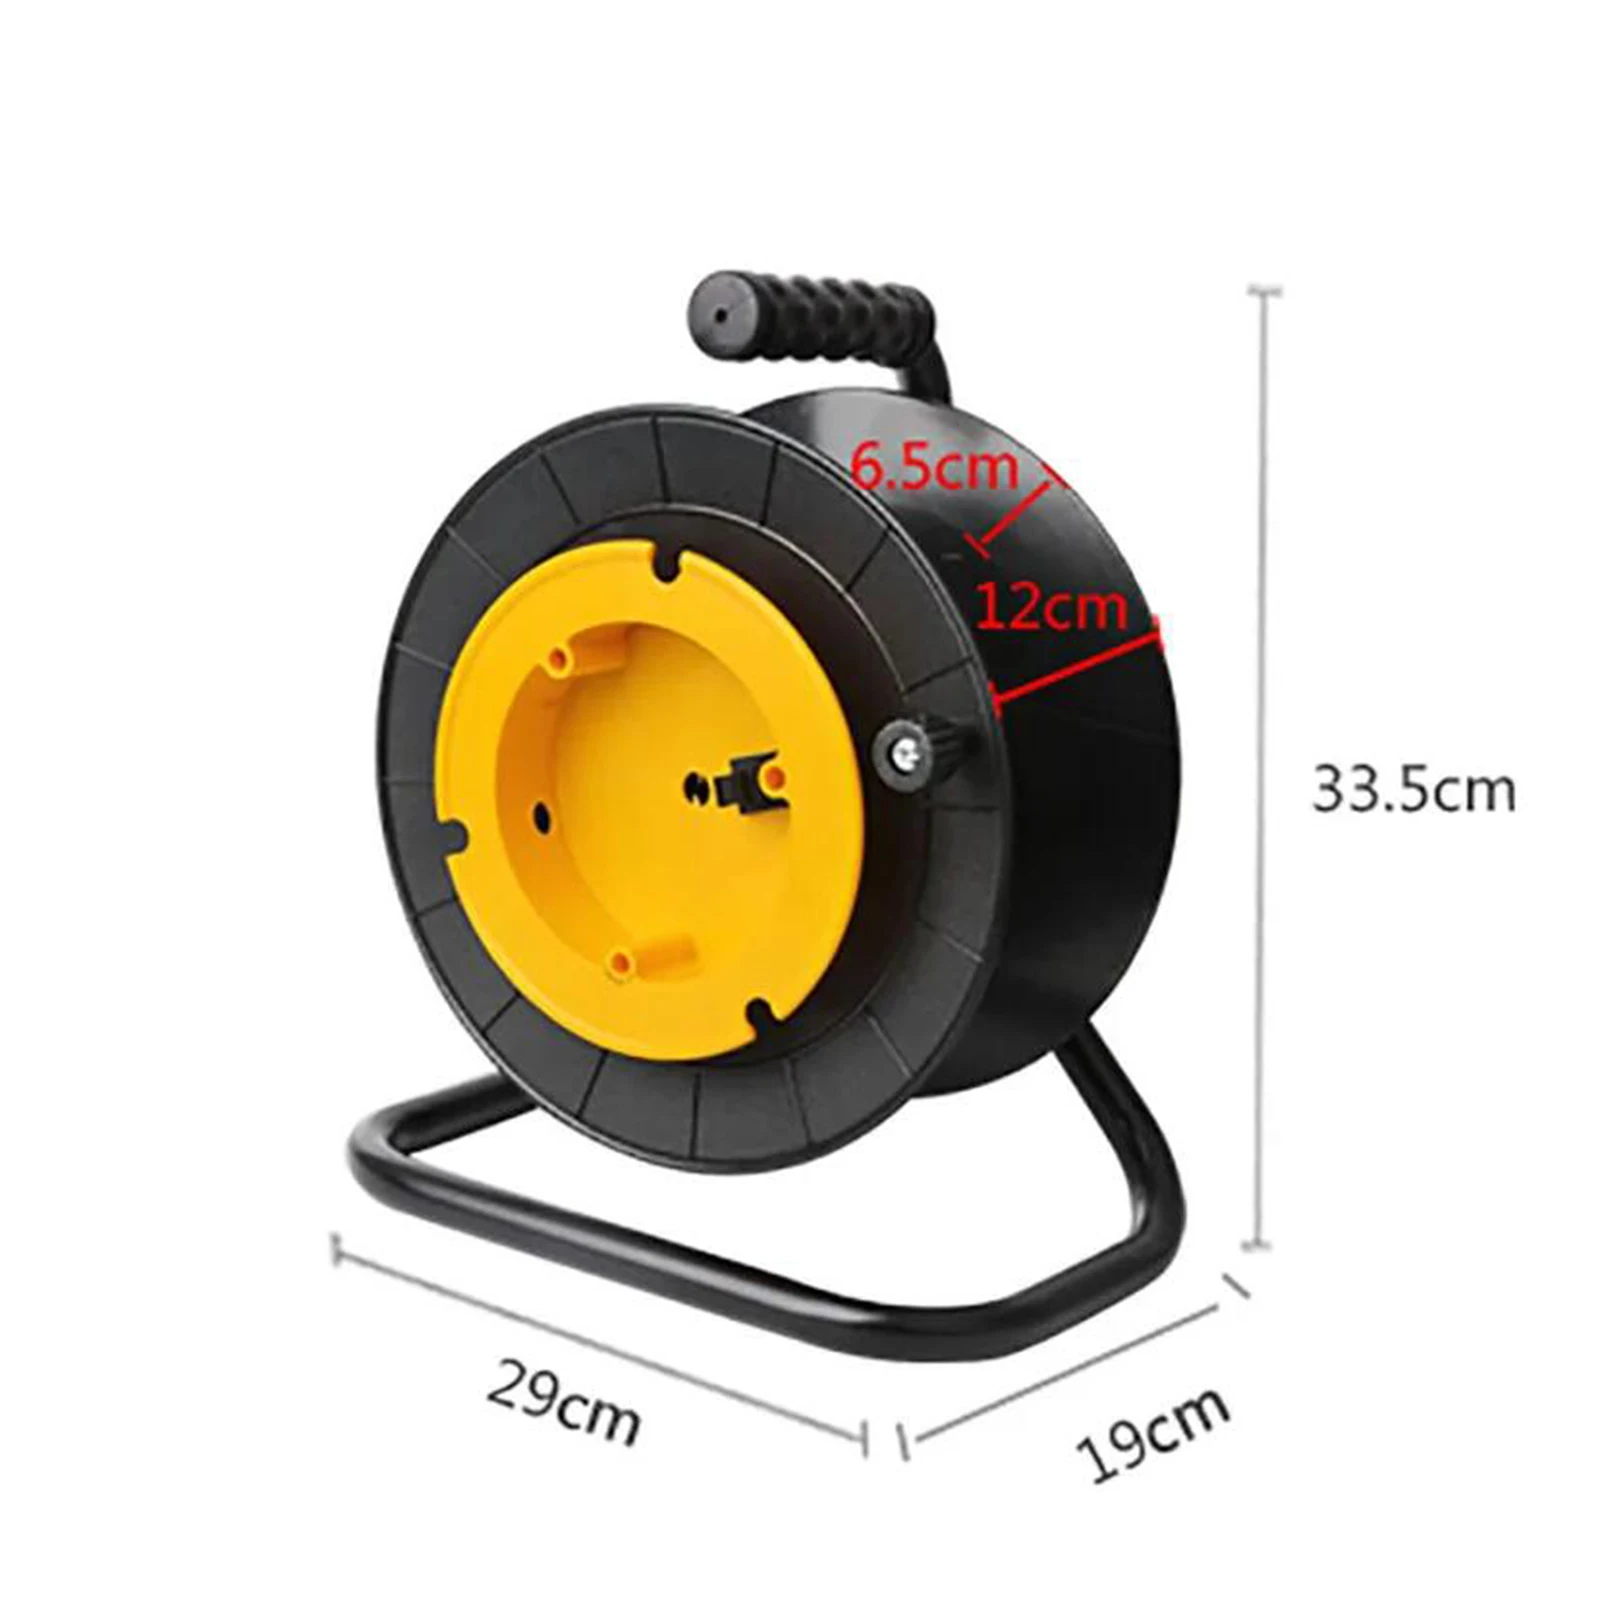 https://ae01.alicdn.com/kf/S1ab1b6ca35ae45778d62e4a3e2dc8233P/Wire-Cable-Reel-Optical-Fiber-Empty-Disk-Electrical-Cord-Cable-Reel-for-Accessories-Travel-Trailer-Cables.jpg